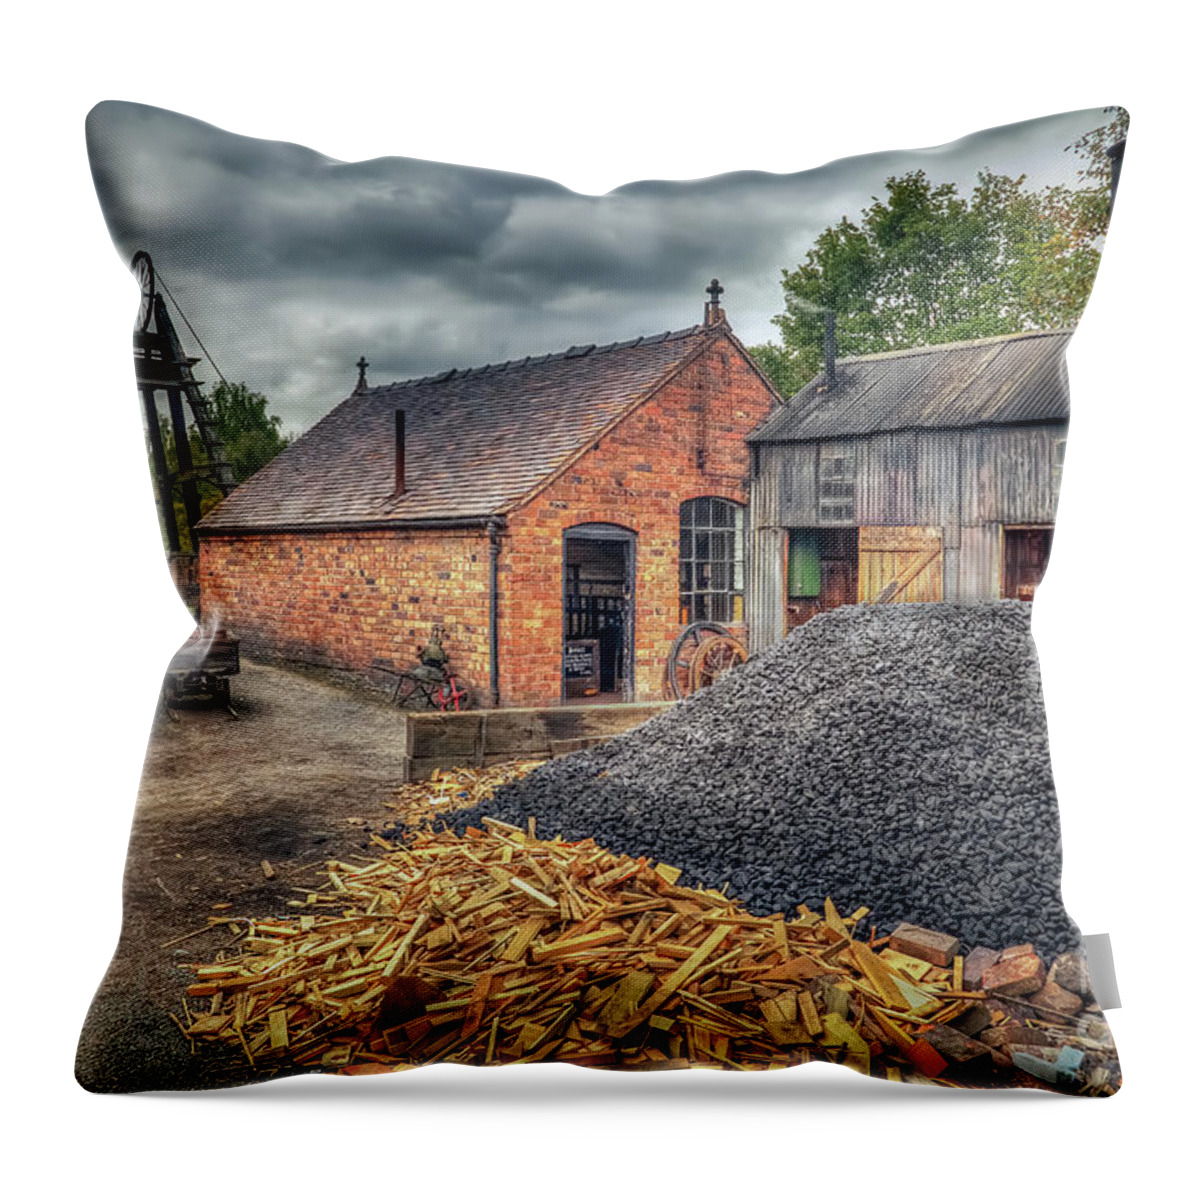 Mining Village Throw Pillow featuring the photograph Mining Village by Adrian Evans